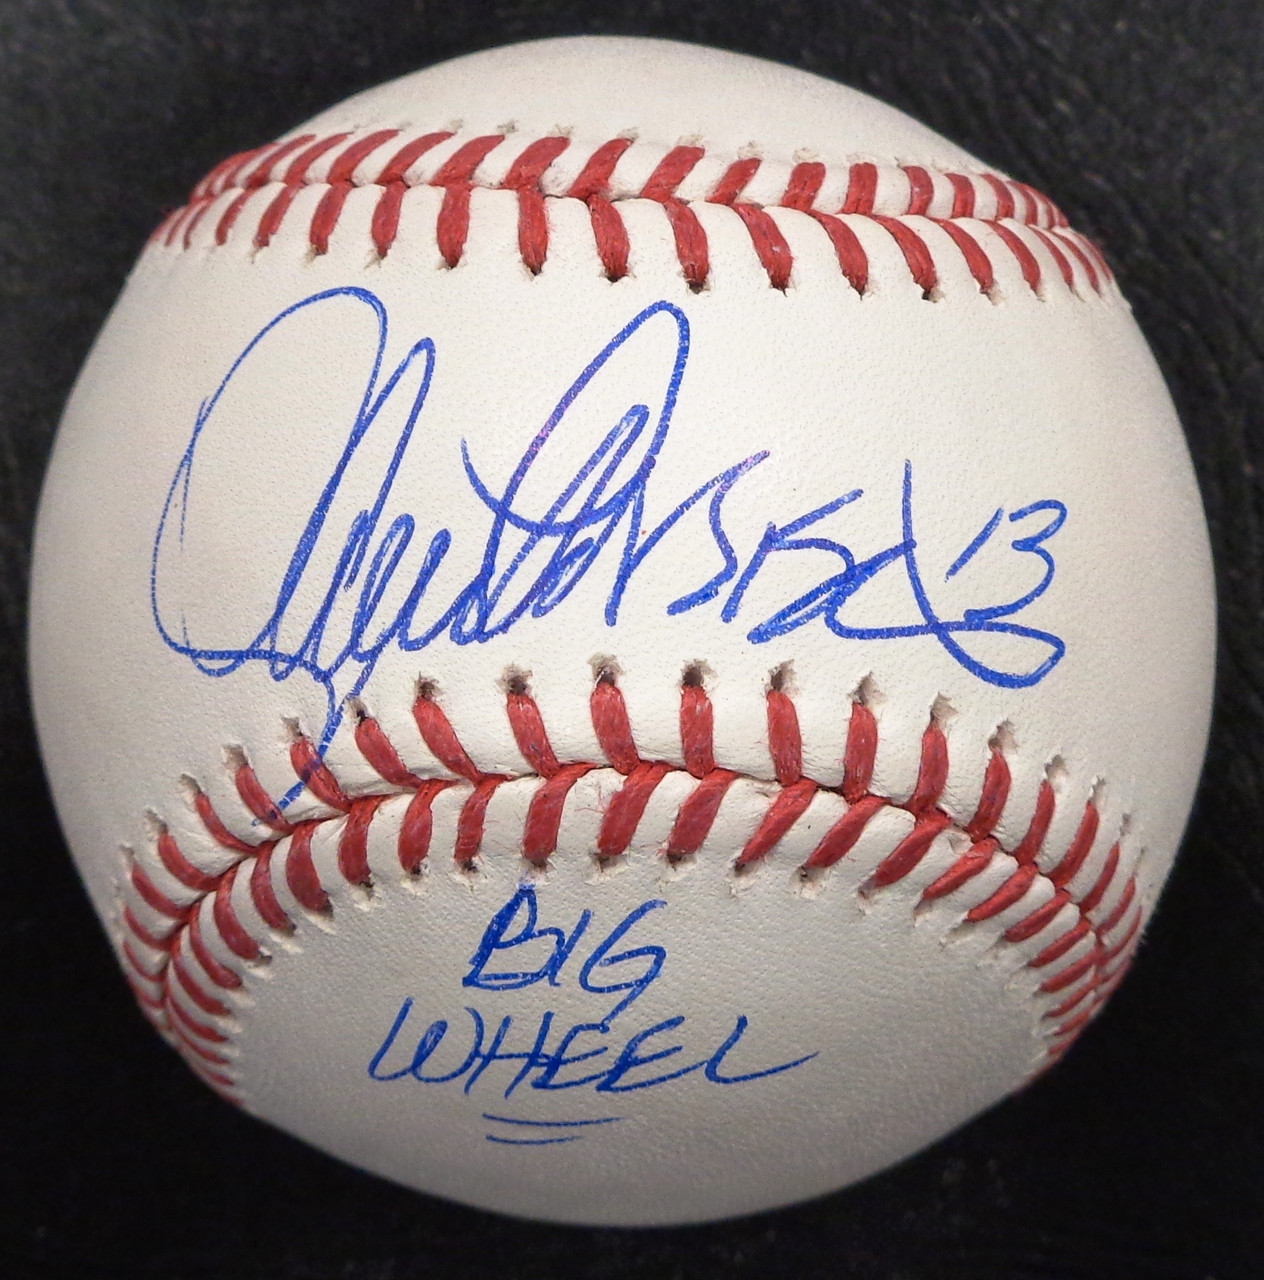 Lance Parrish Autographed Baseball - Official Major League Ball inscribed  Big Wheel